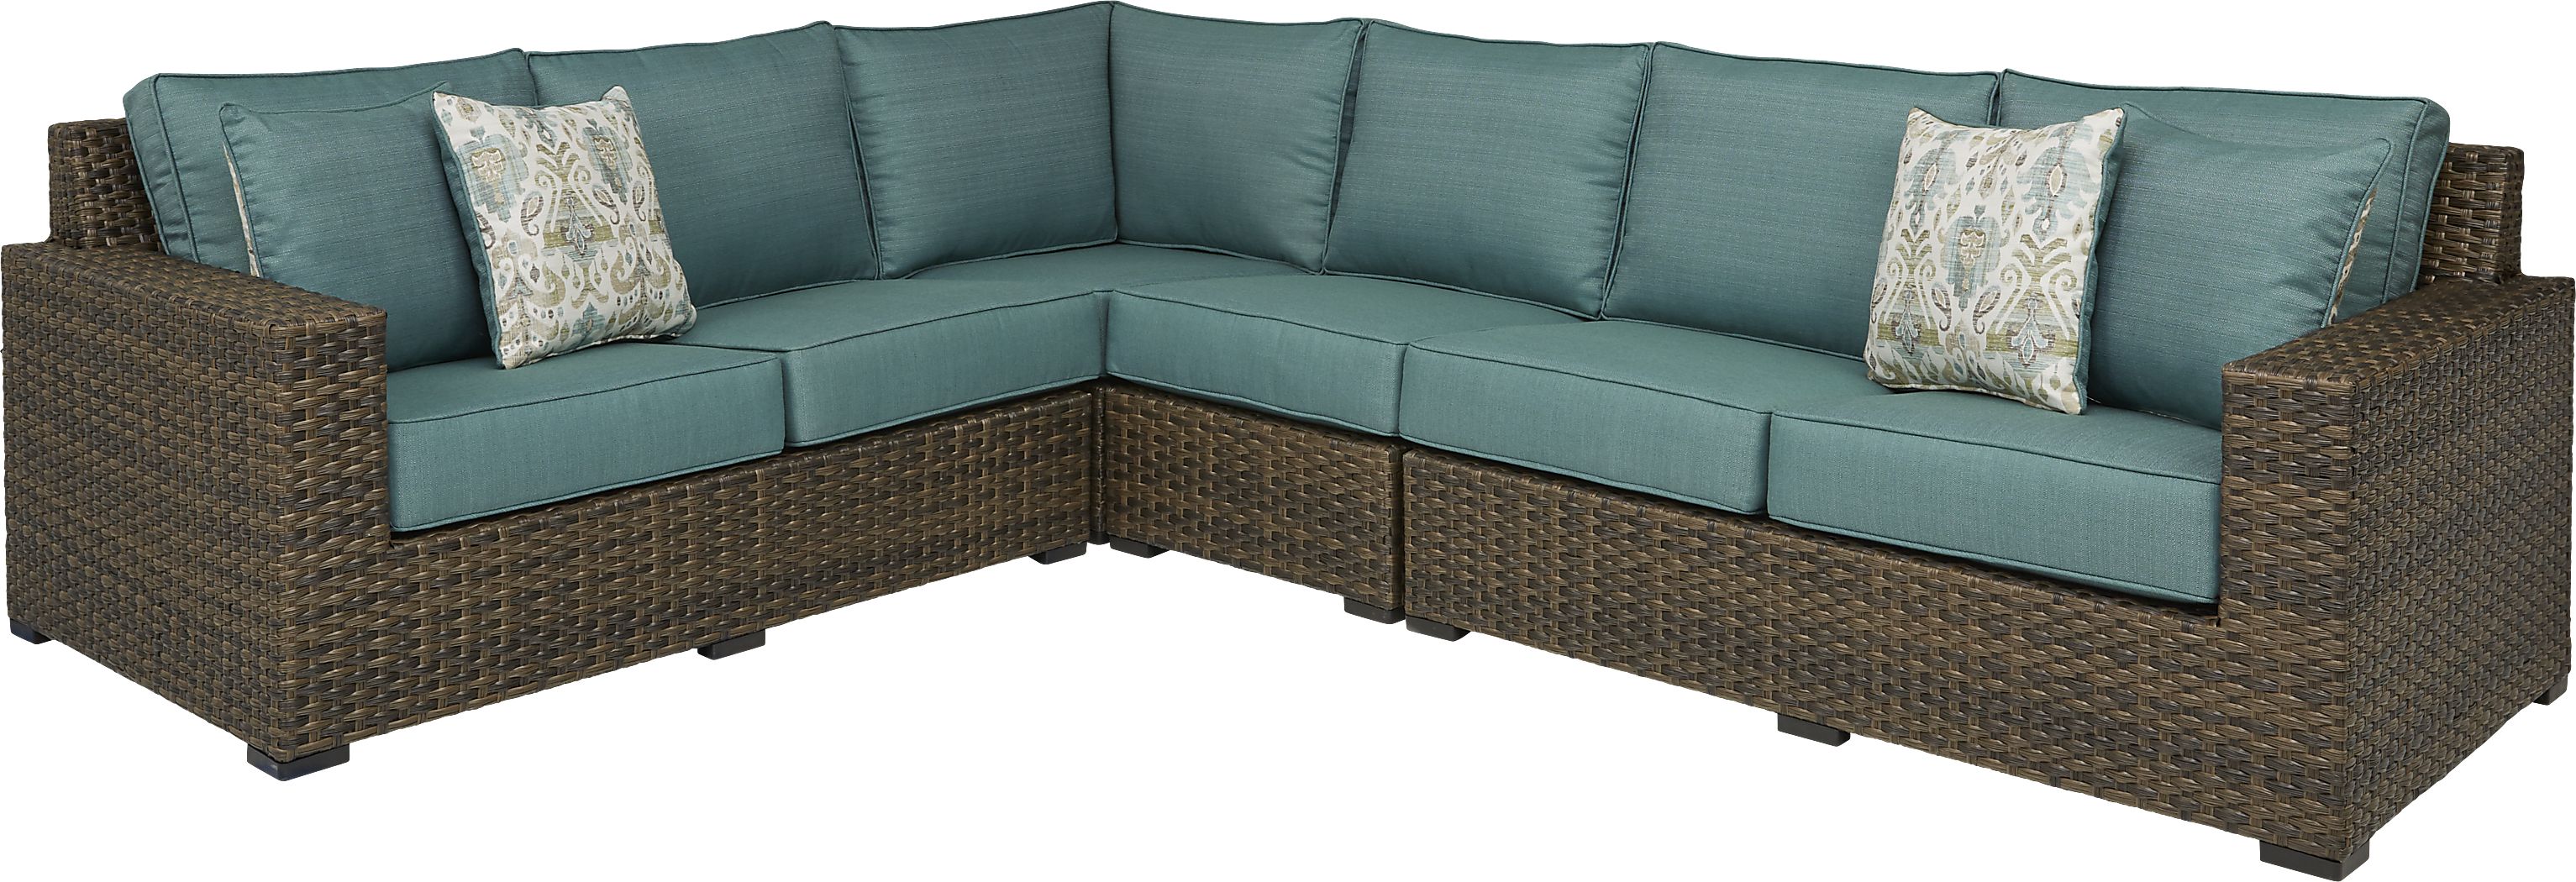 Rialto 4 Pc Outdoor Sectional with Cushions